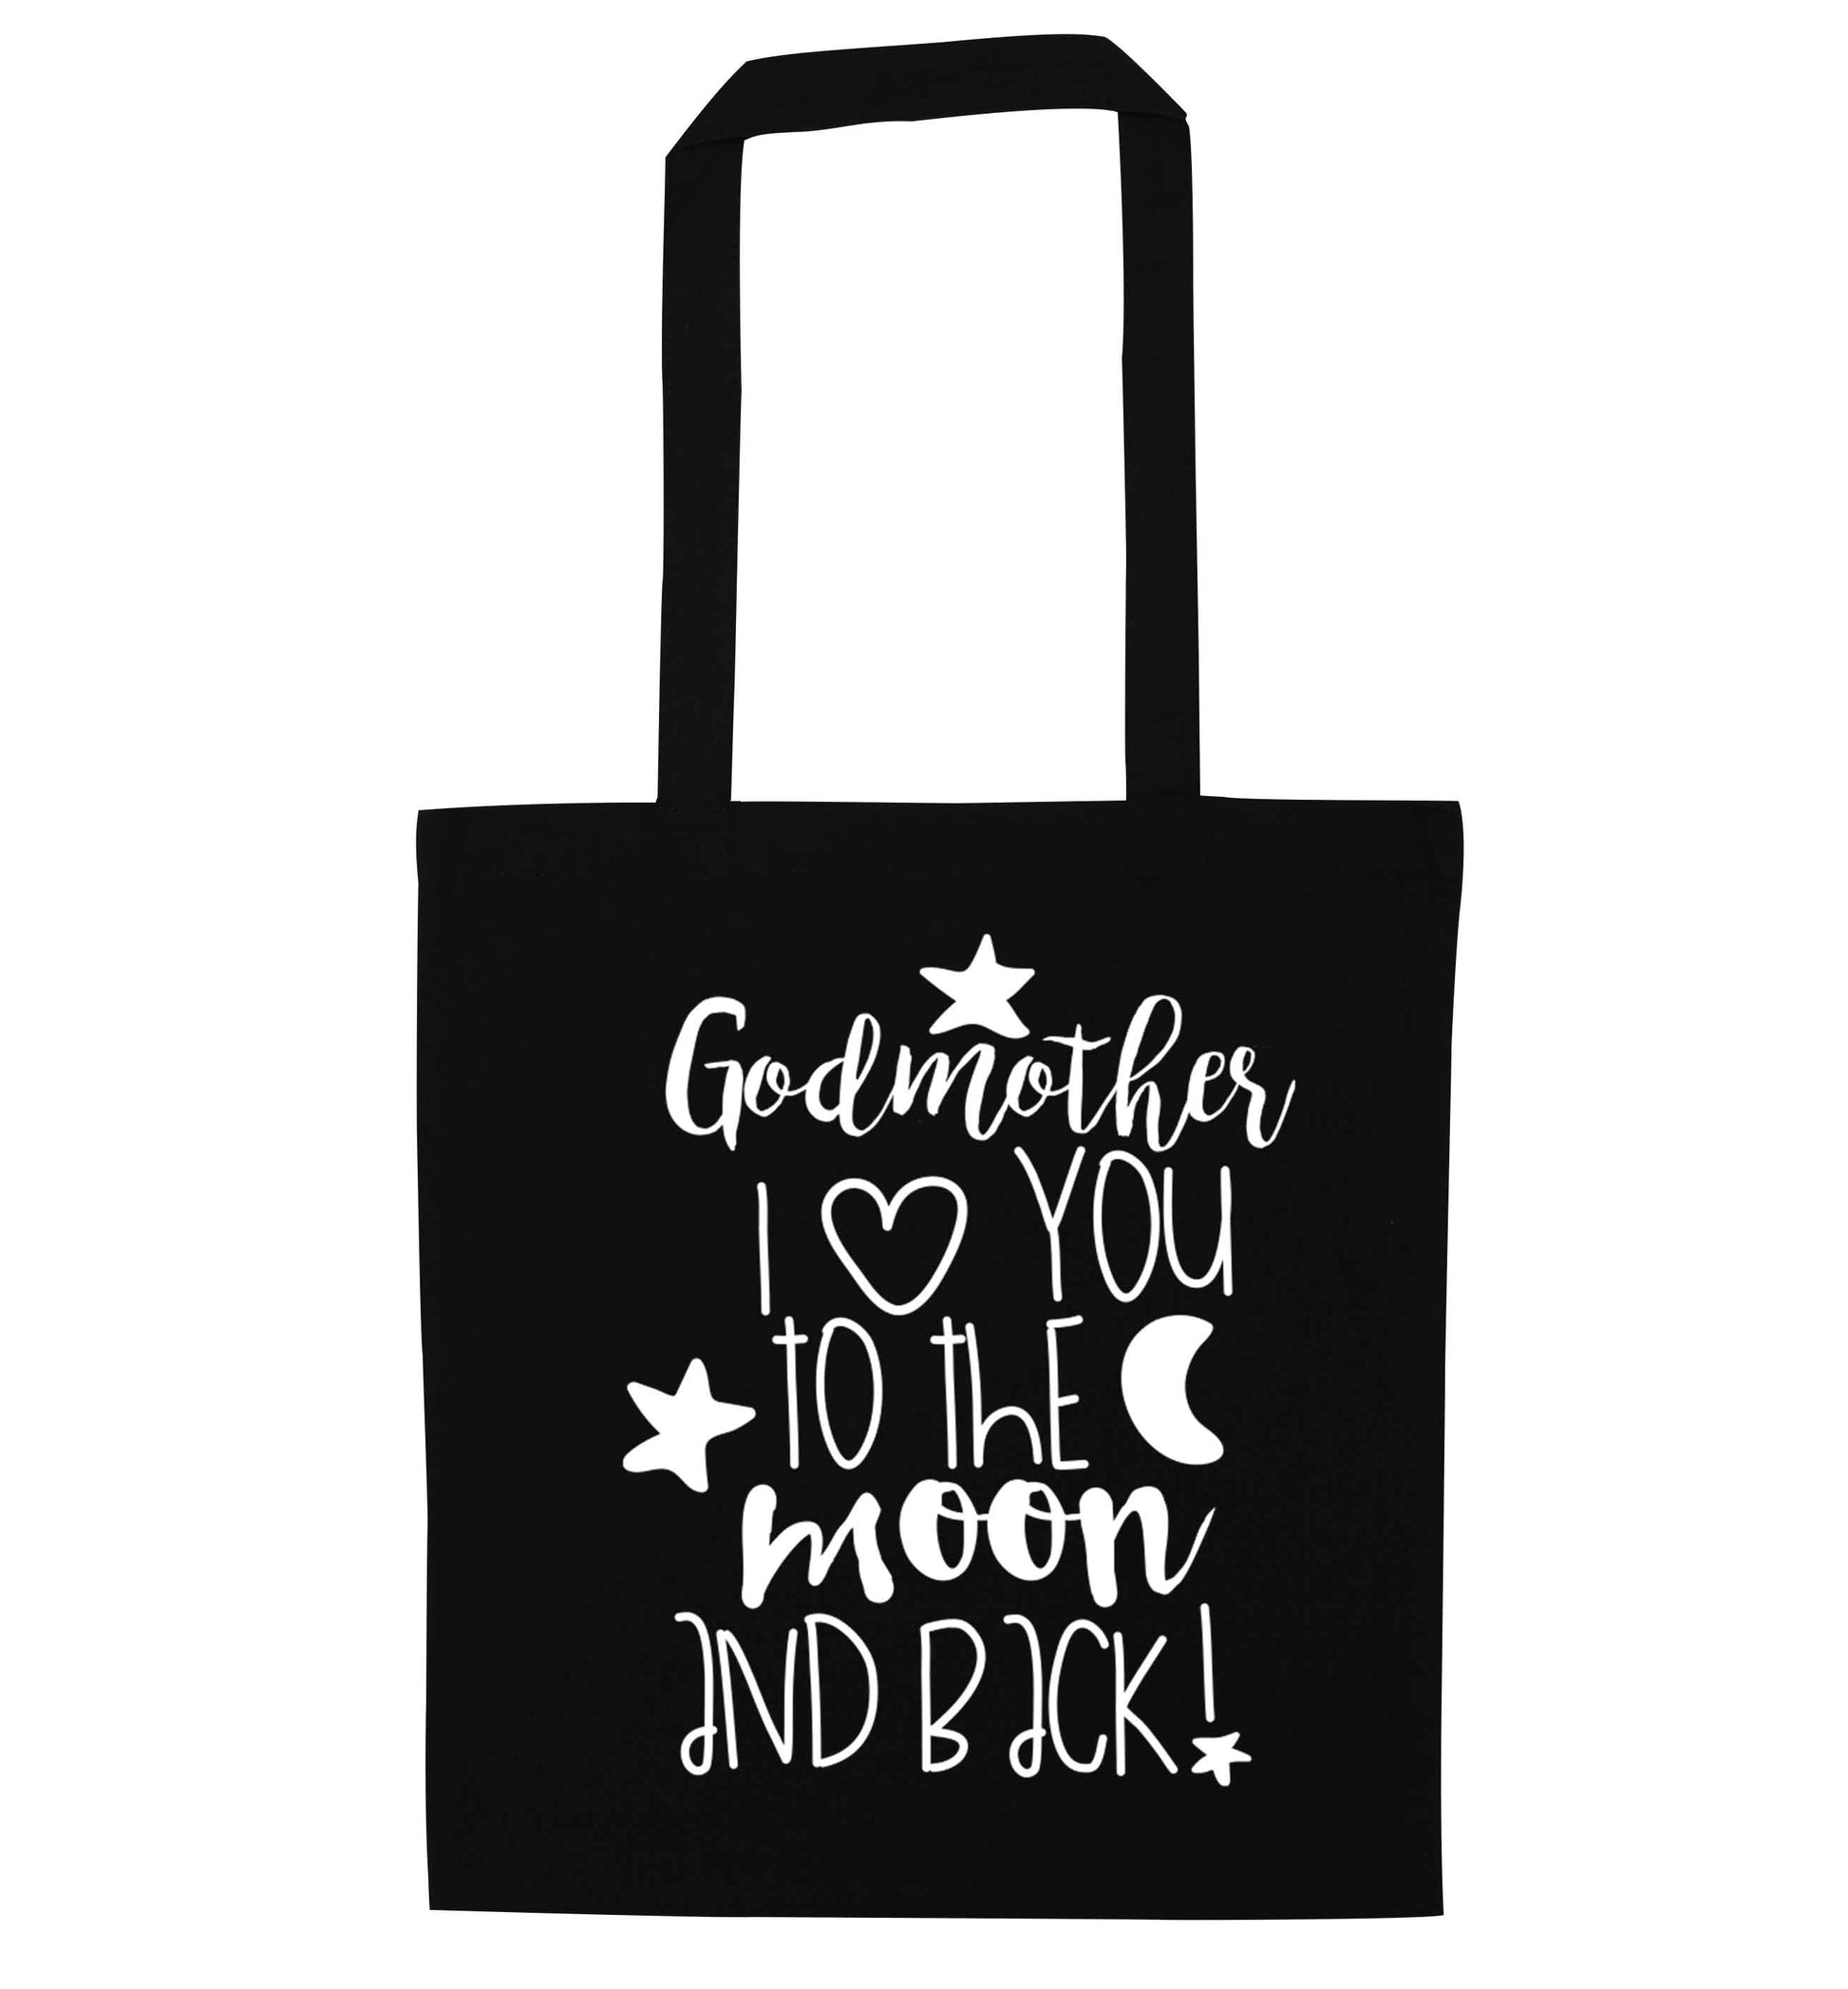 Godmother I love you to the moon and back black tote bag